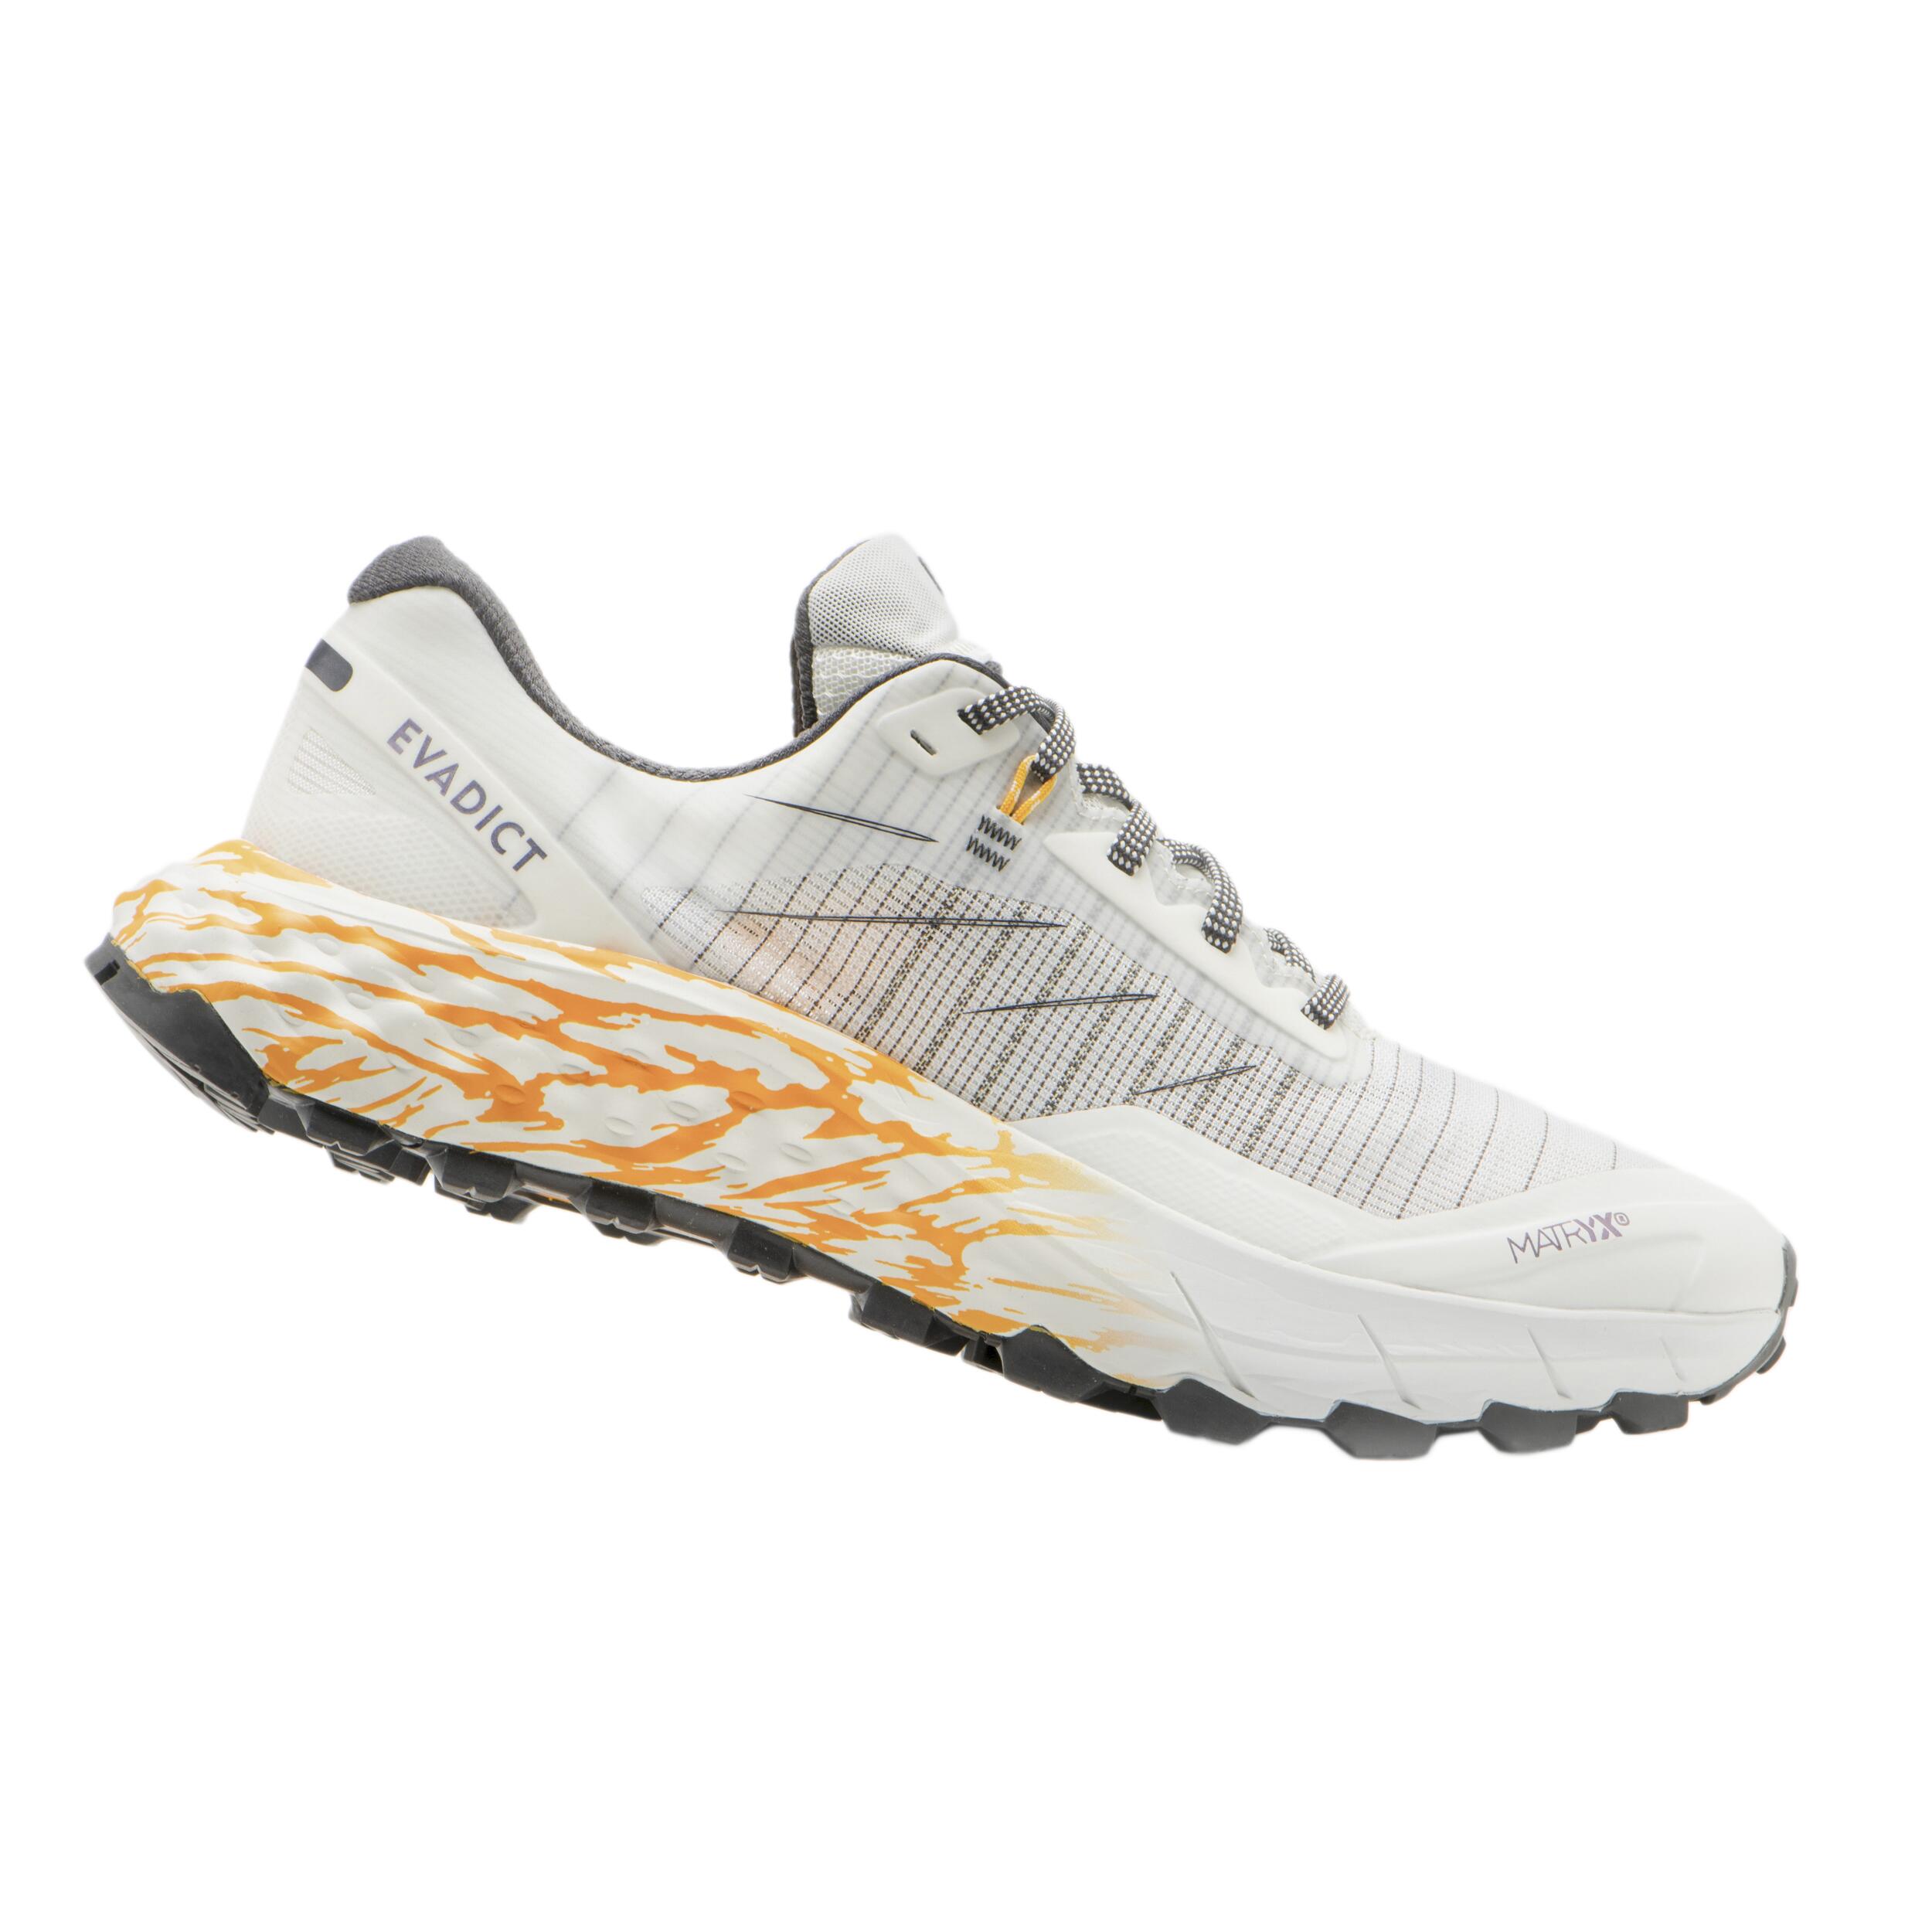 EVADICT MT CUSHION 2 men's trail running shoes White Limited Edition 14/25